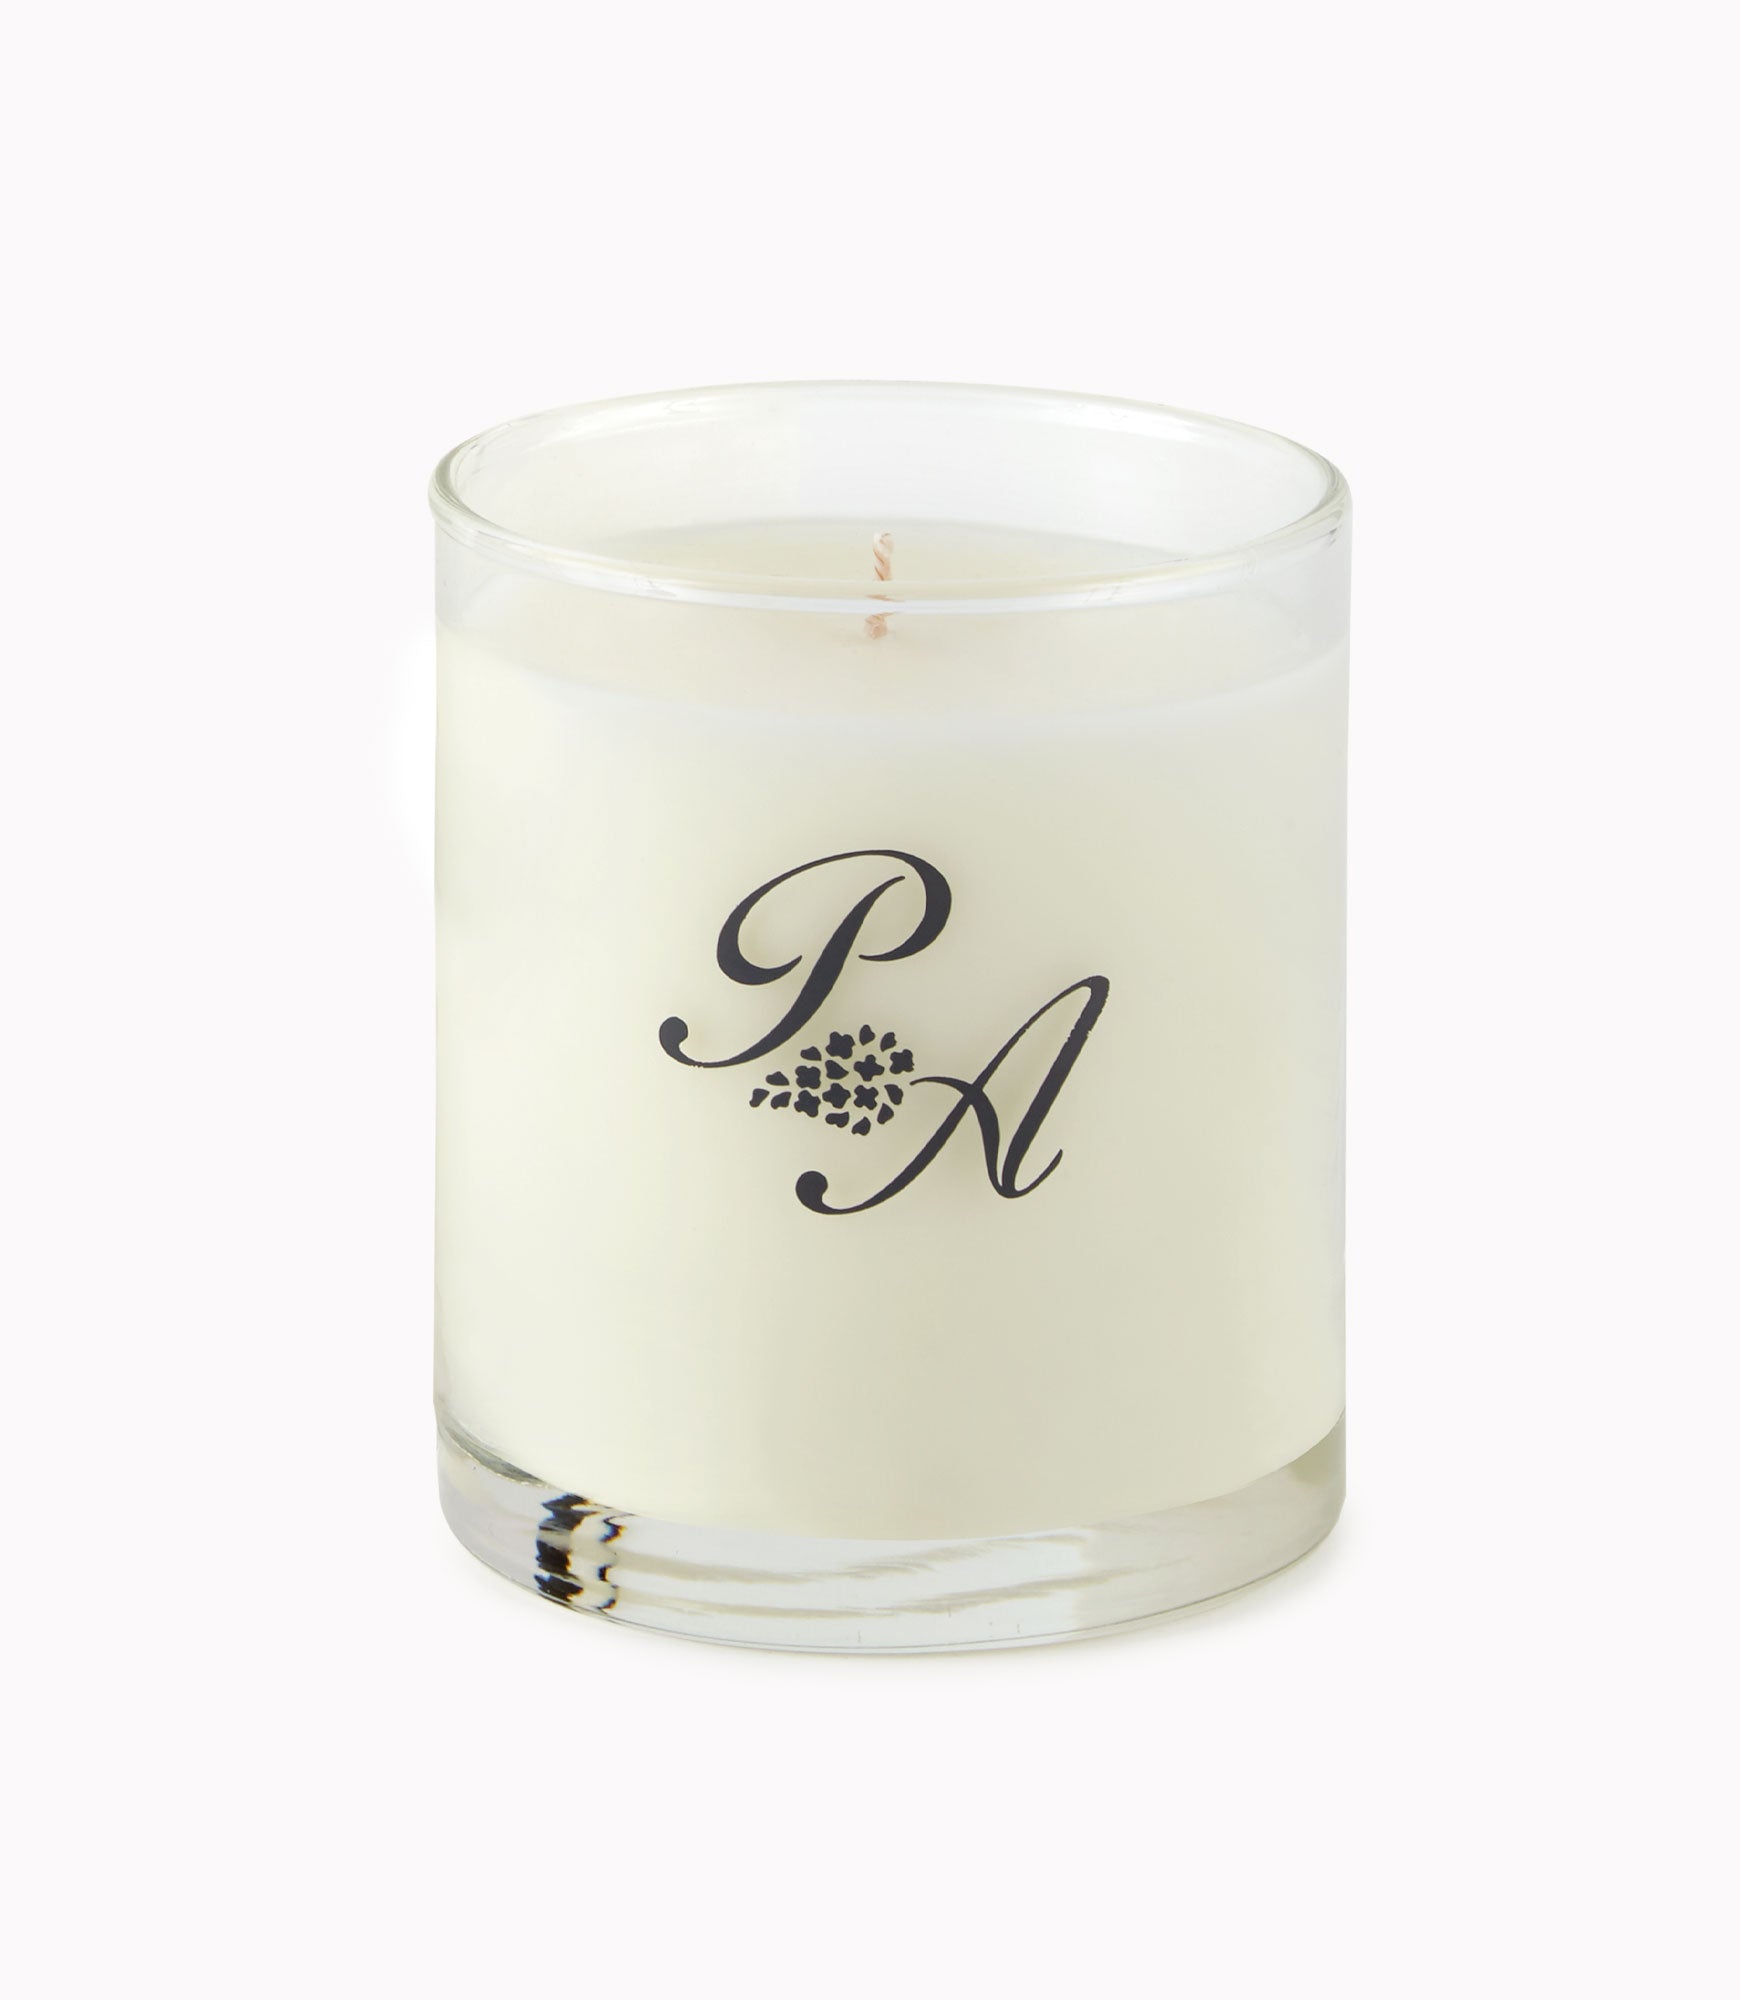 Crisp Rose Candle only